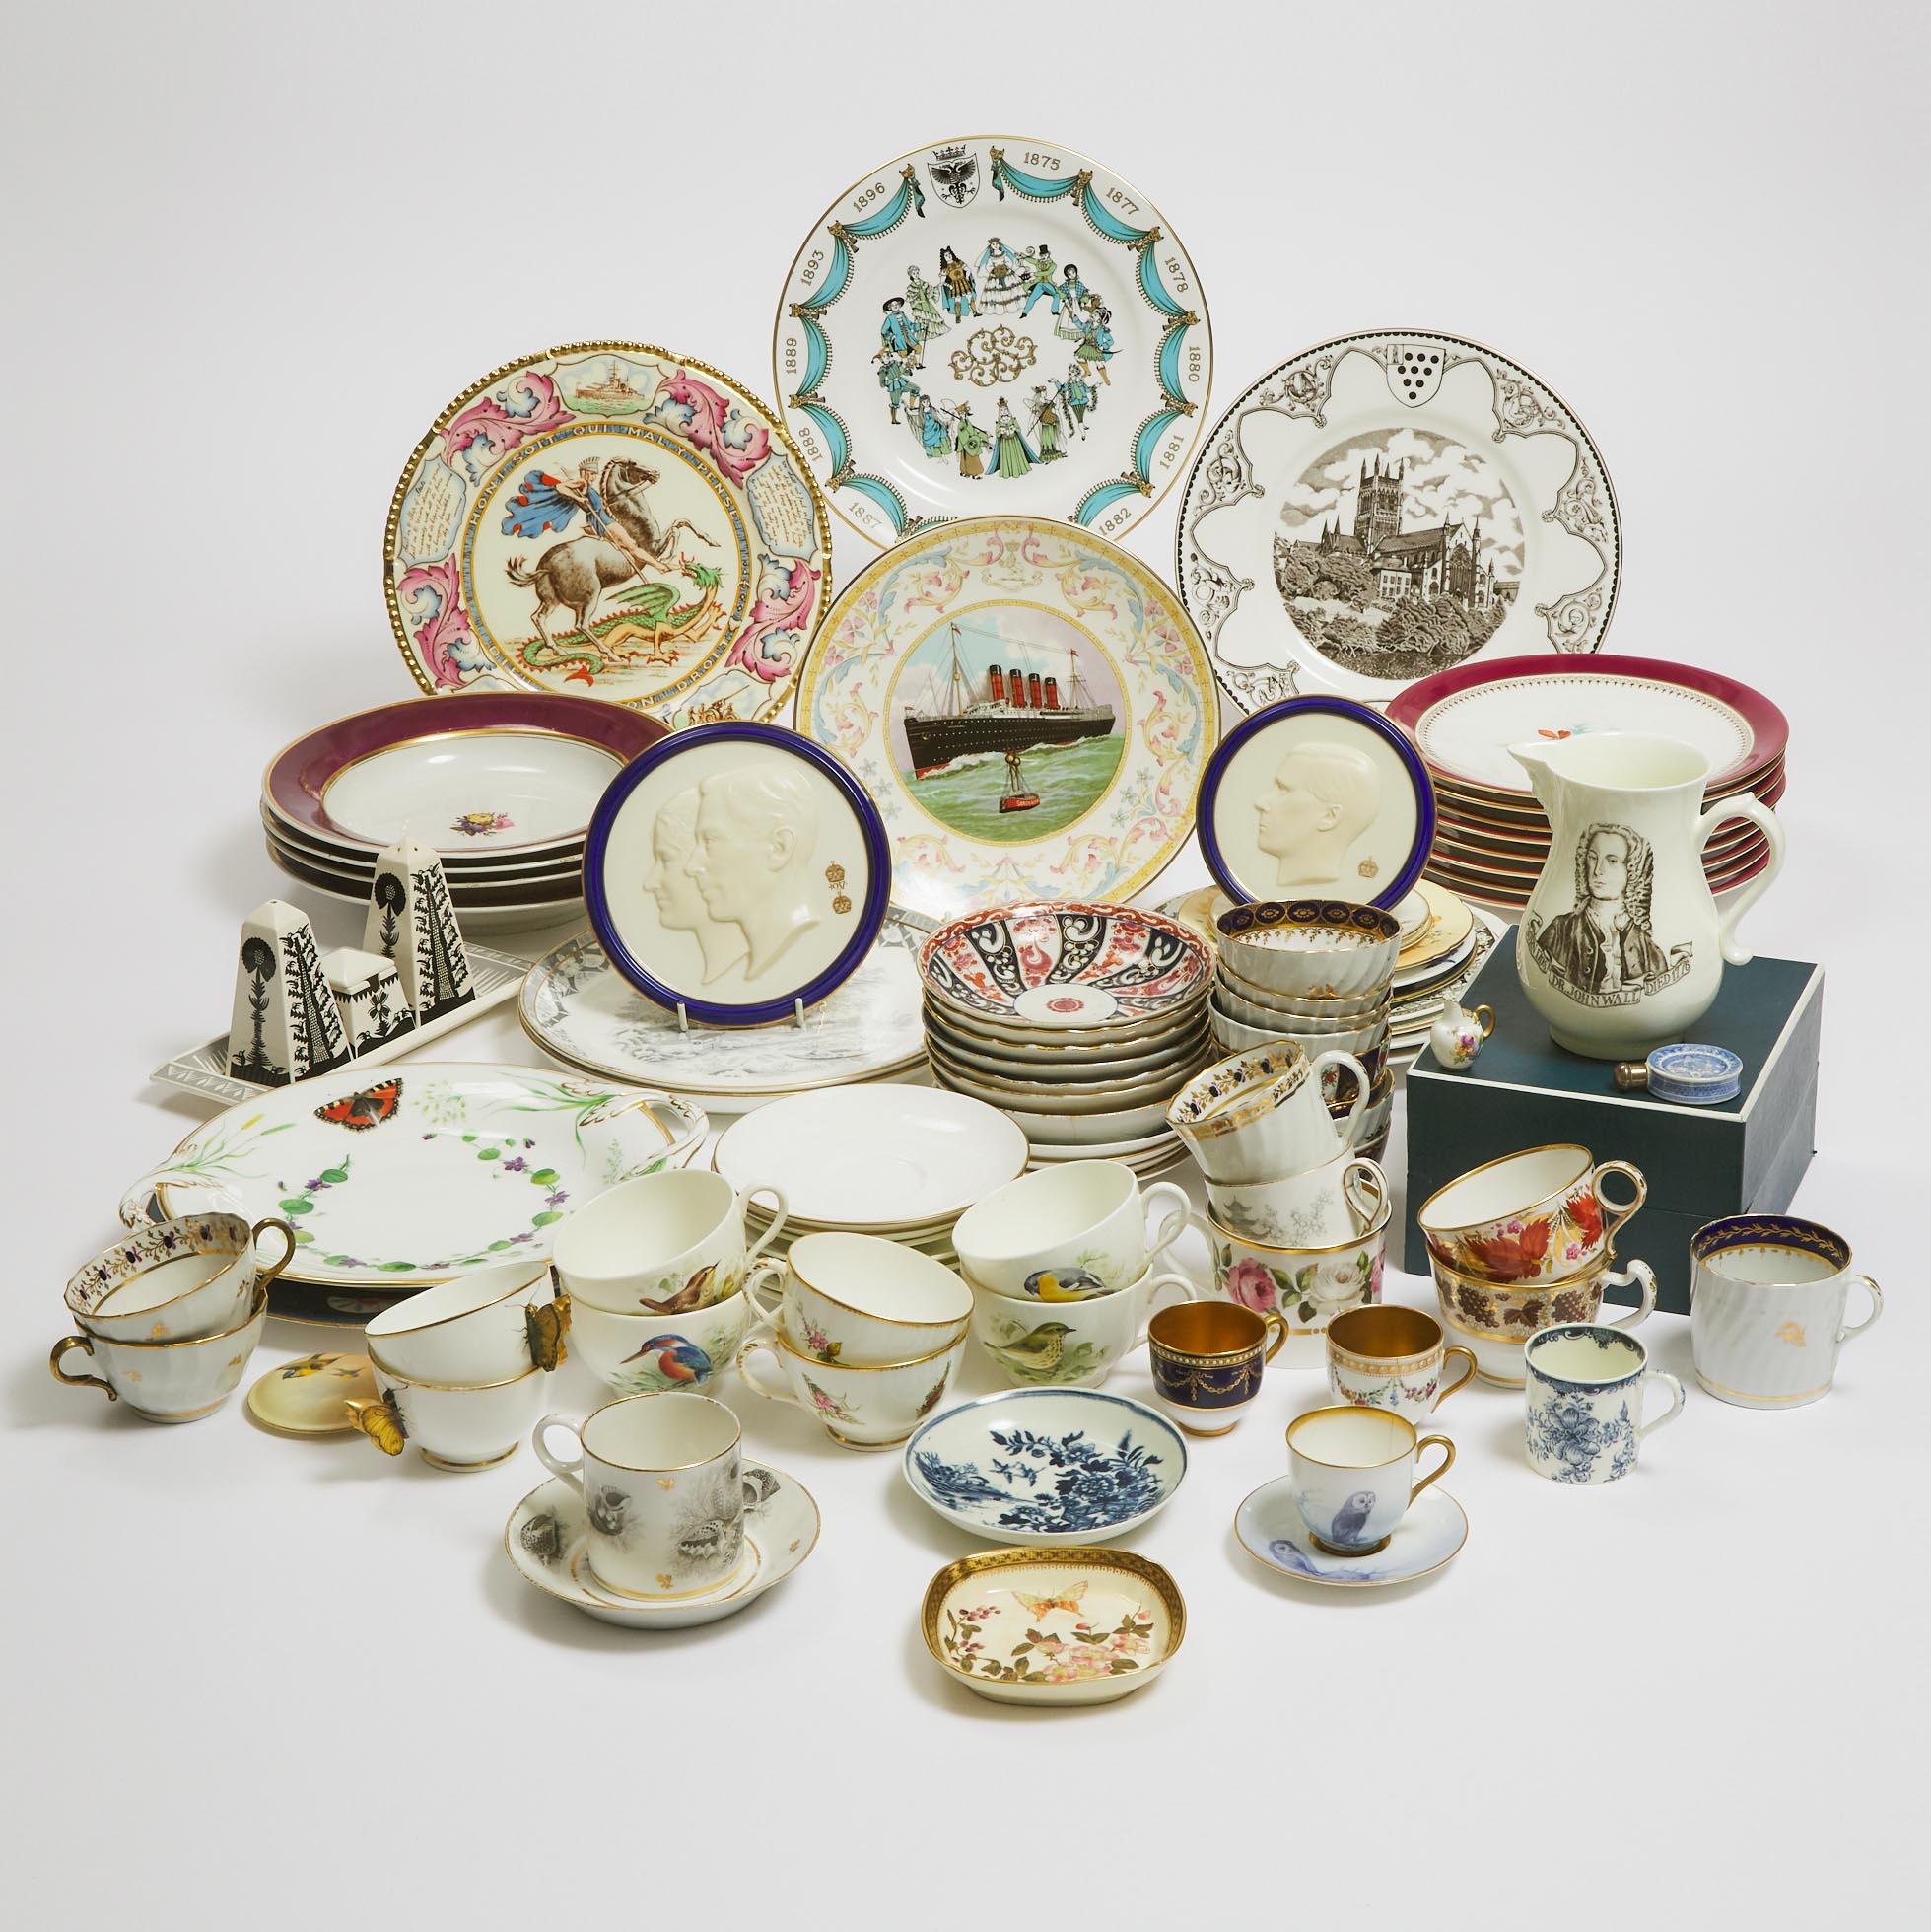 Group of Worcester and Other English Porcelain, late 18th-20th century